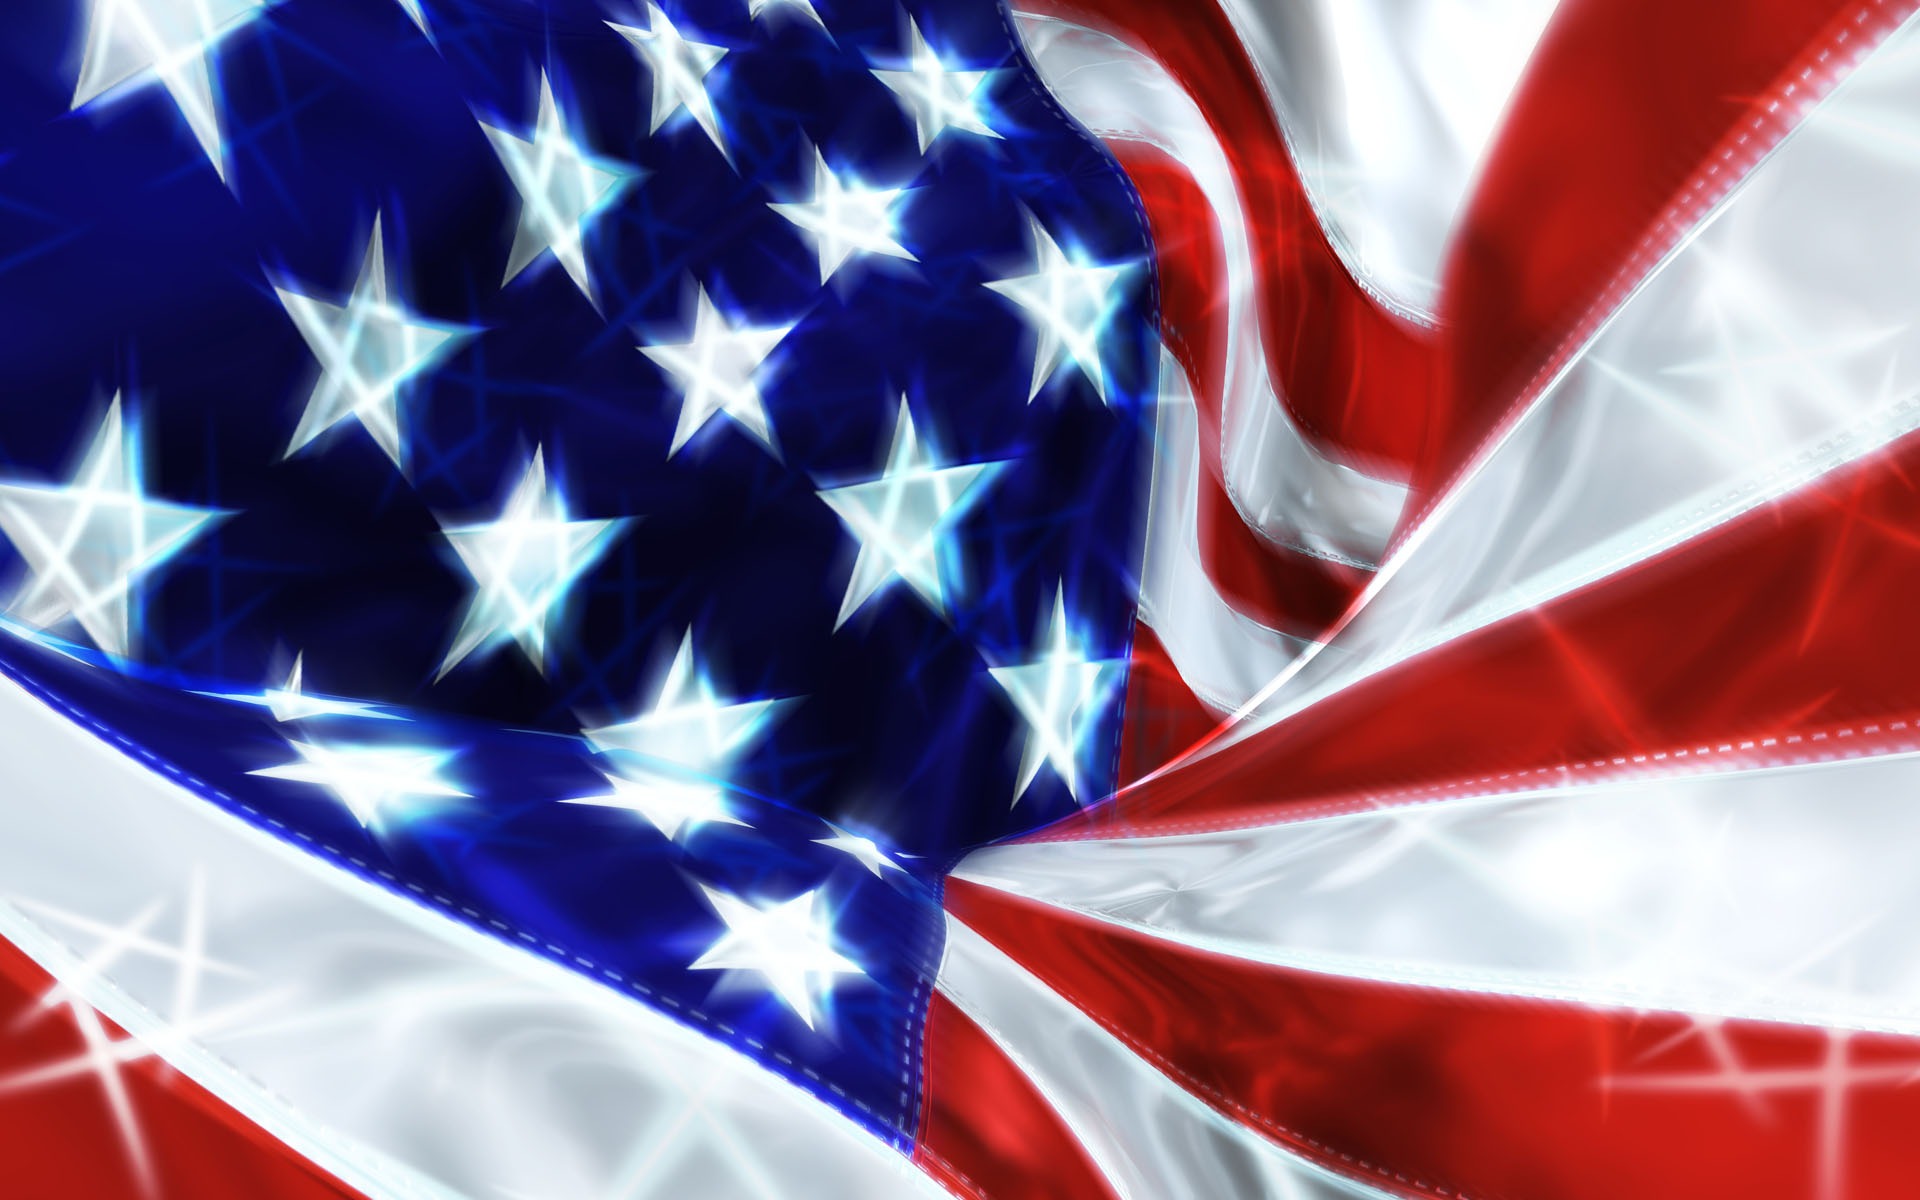 U.S. Independence Day theme wallpaper #4 - 1920x1200